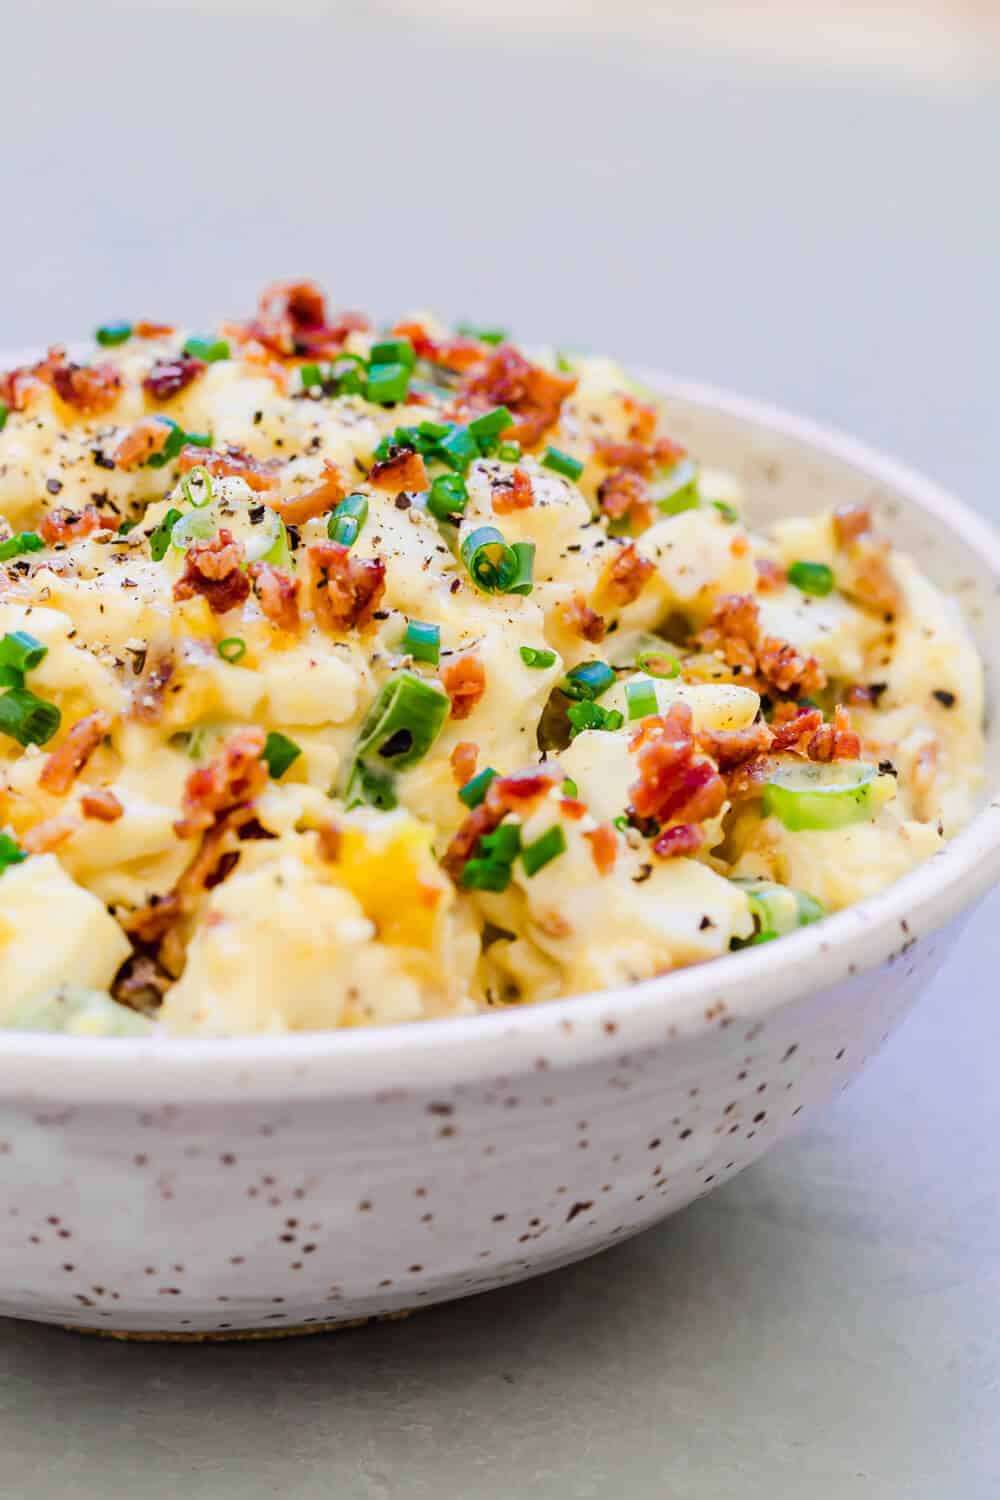 Egg salad garnished with green onions and crispy bacon